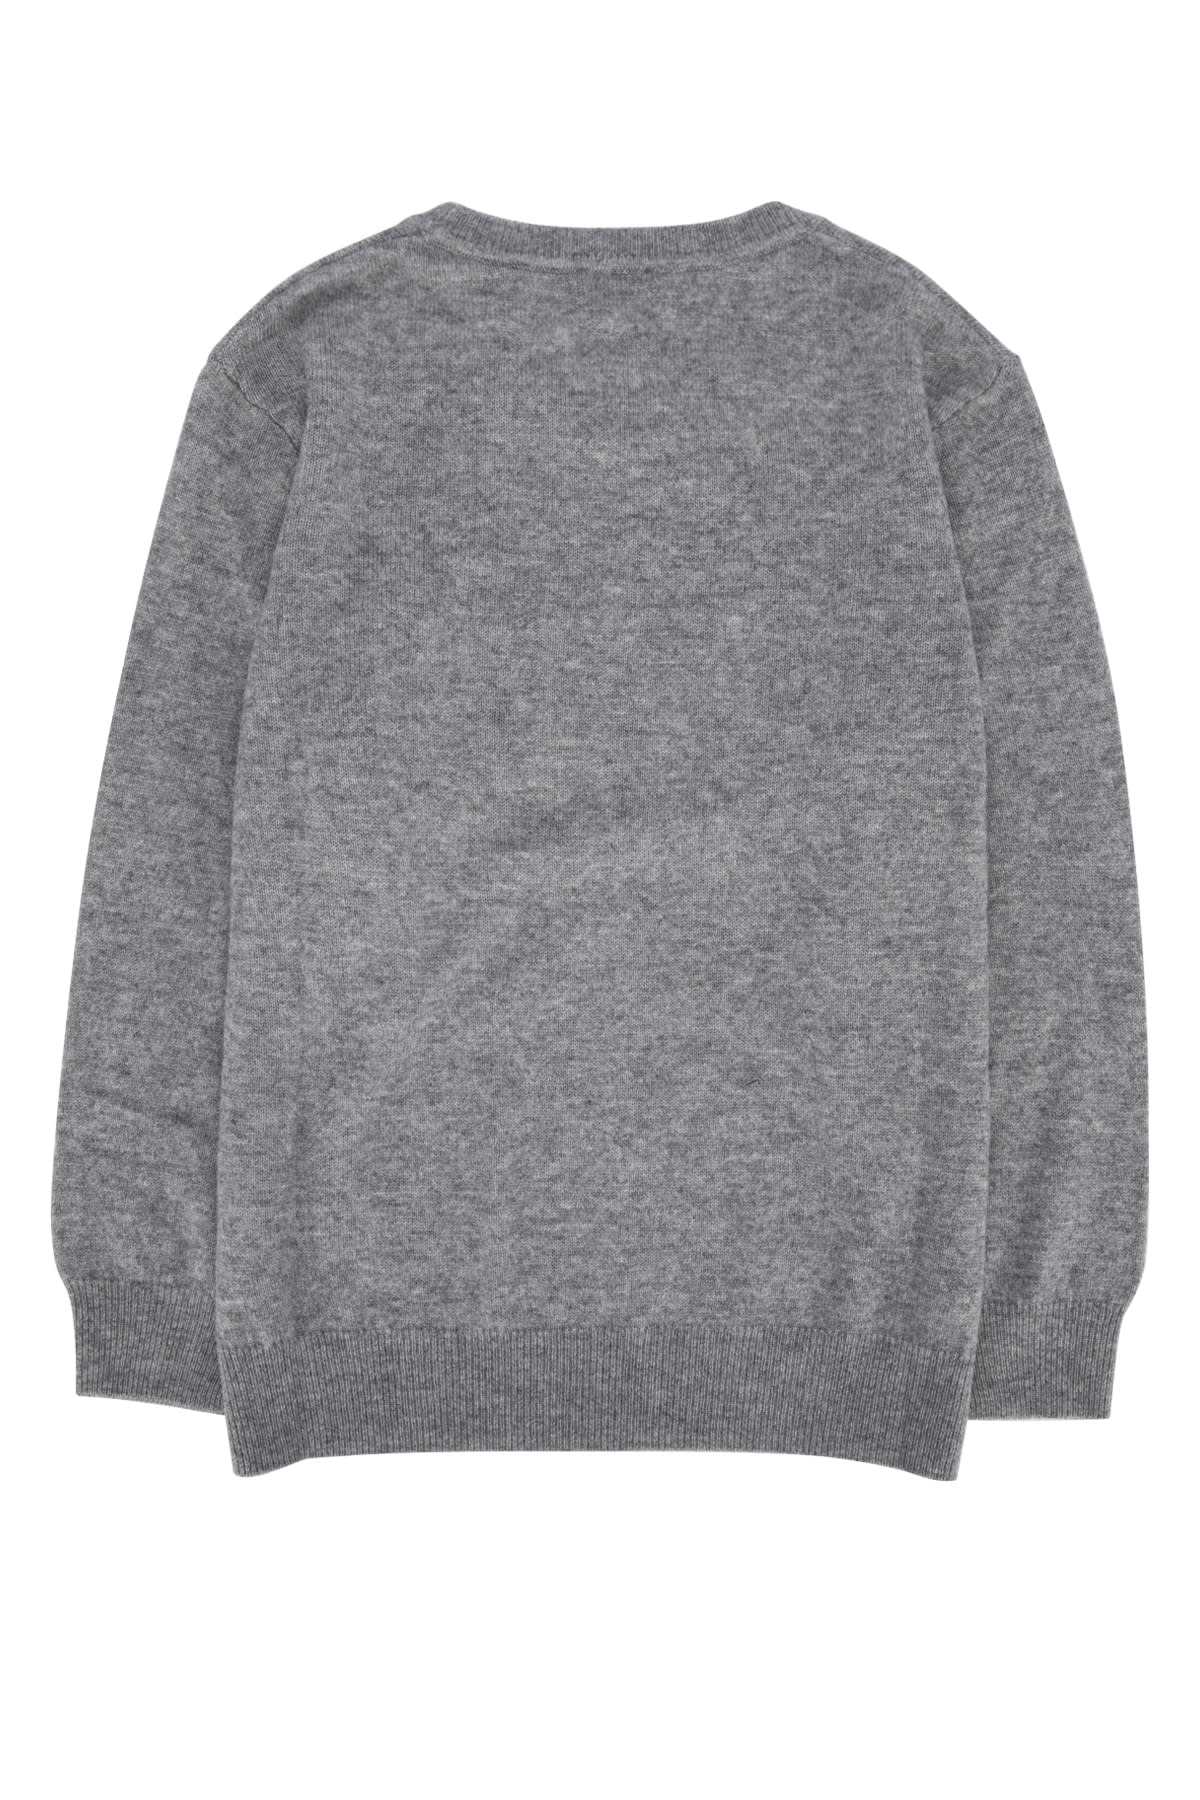 Givenchy Kids' Pullover In Heathergrey